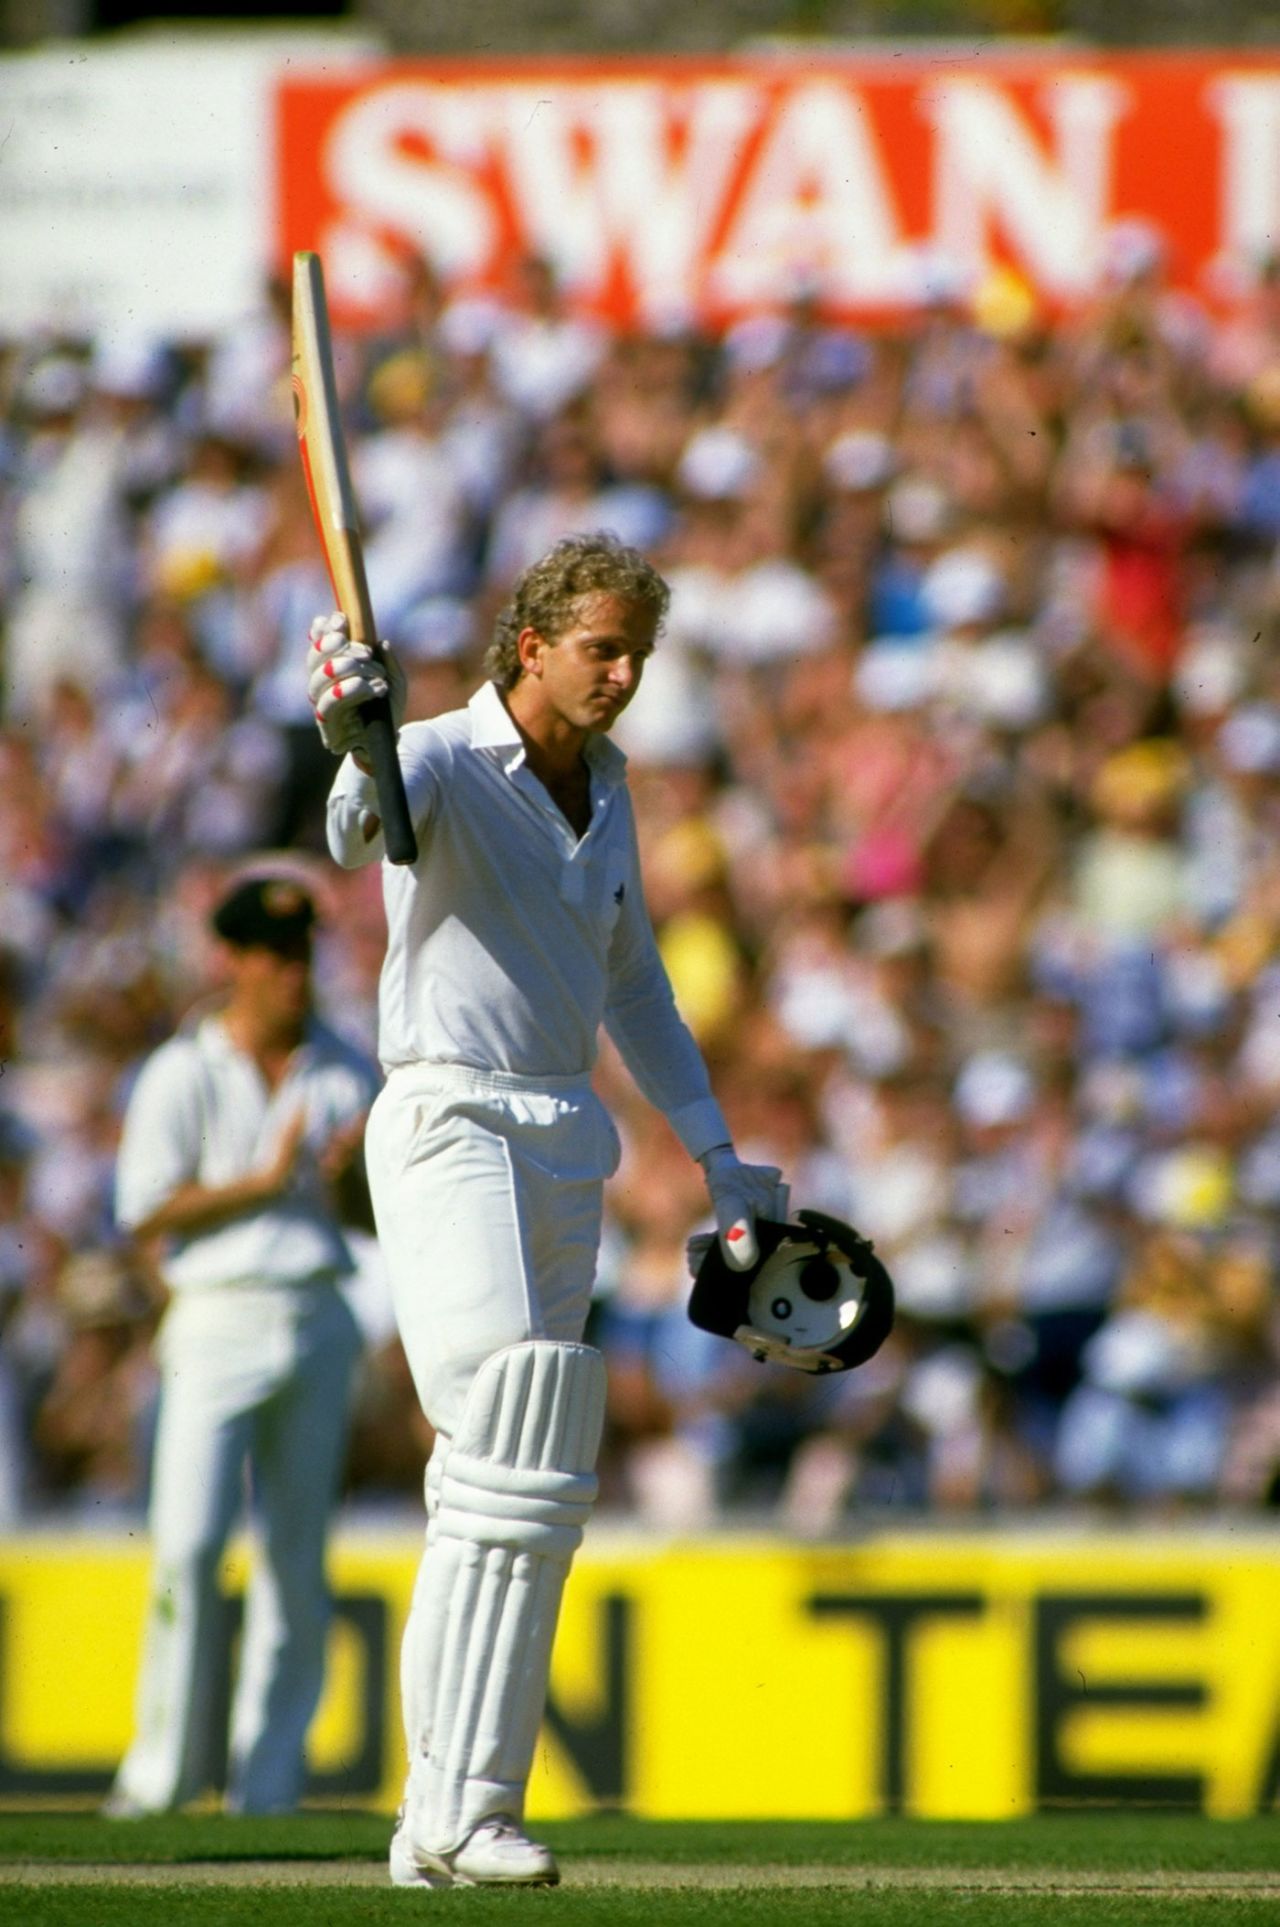 A collapse that didn't matter: David Gower acknowledges his century, England v Australia, 6th Test, The Oval, August 29, 1985